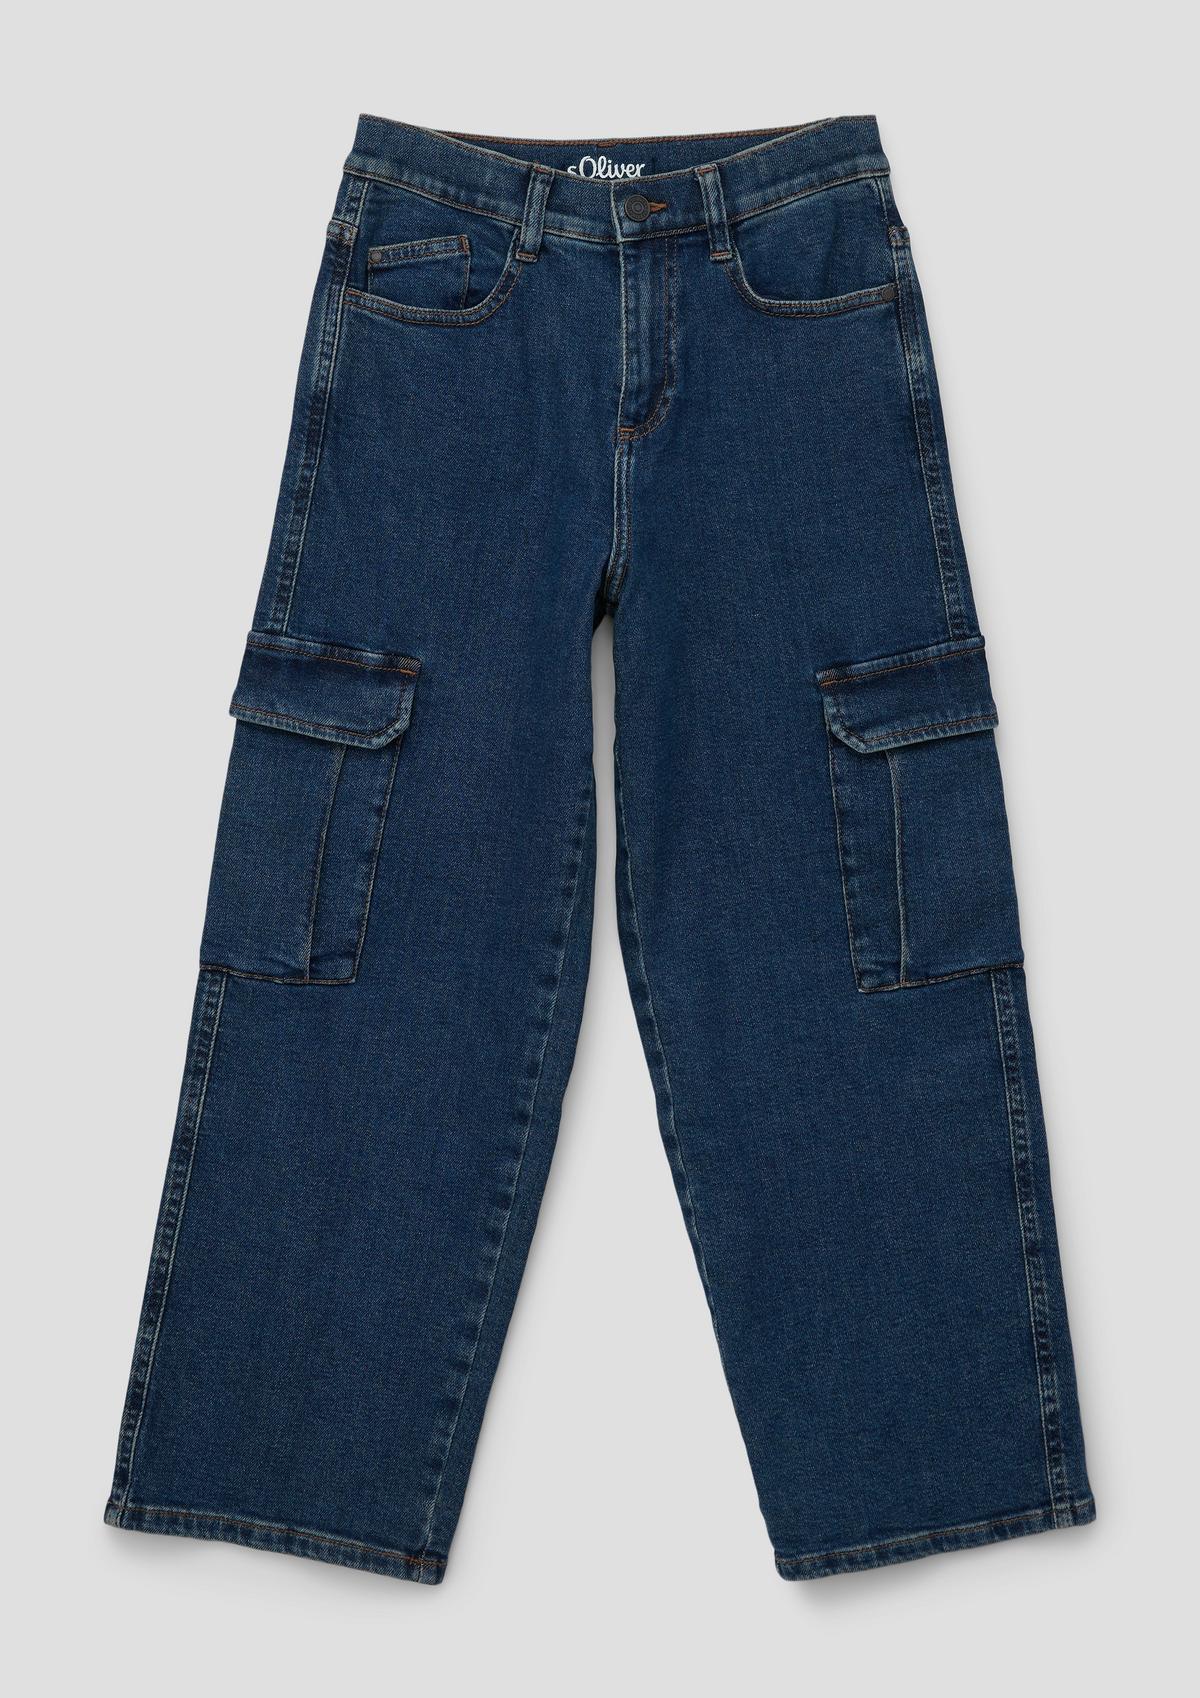 s.Oliver Jeans / relaxed fit / mid rise / wide leg / cargo pockets